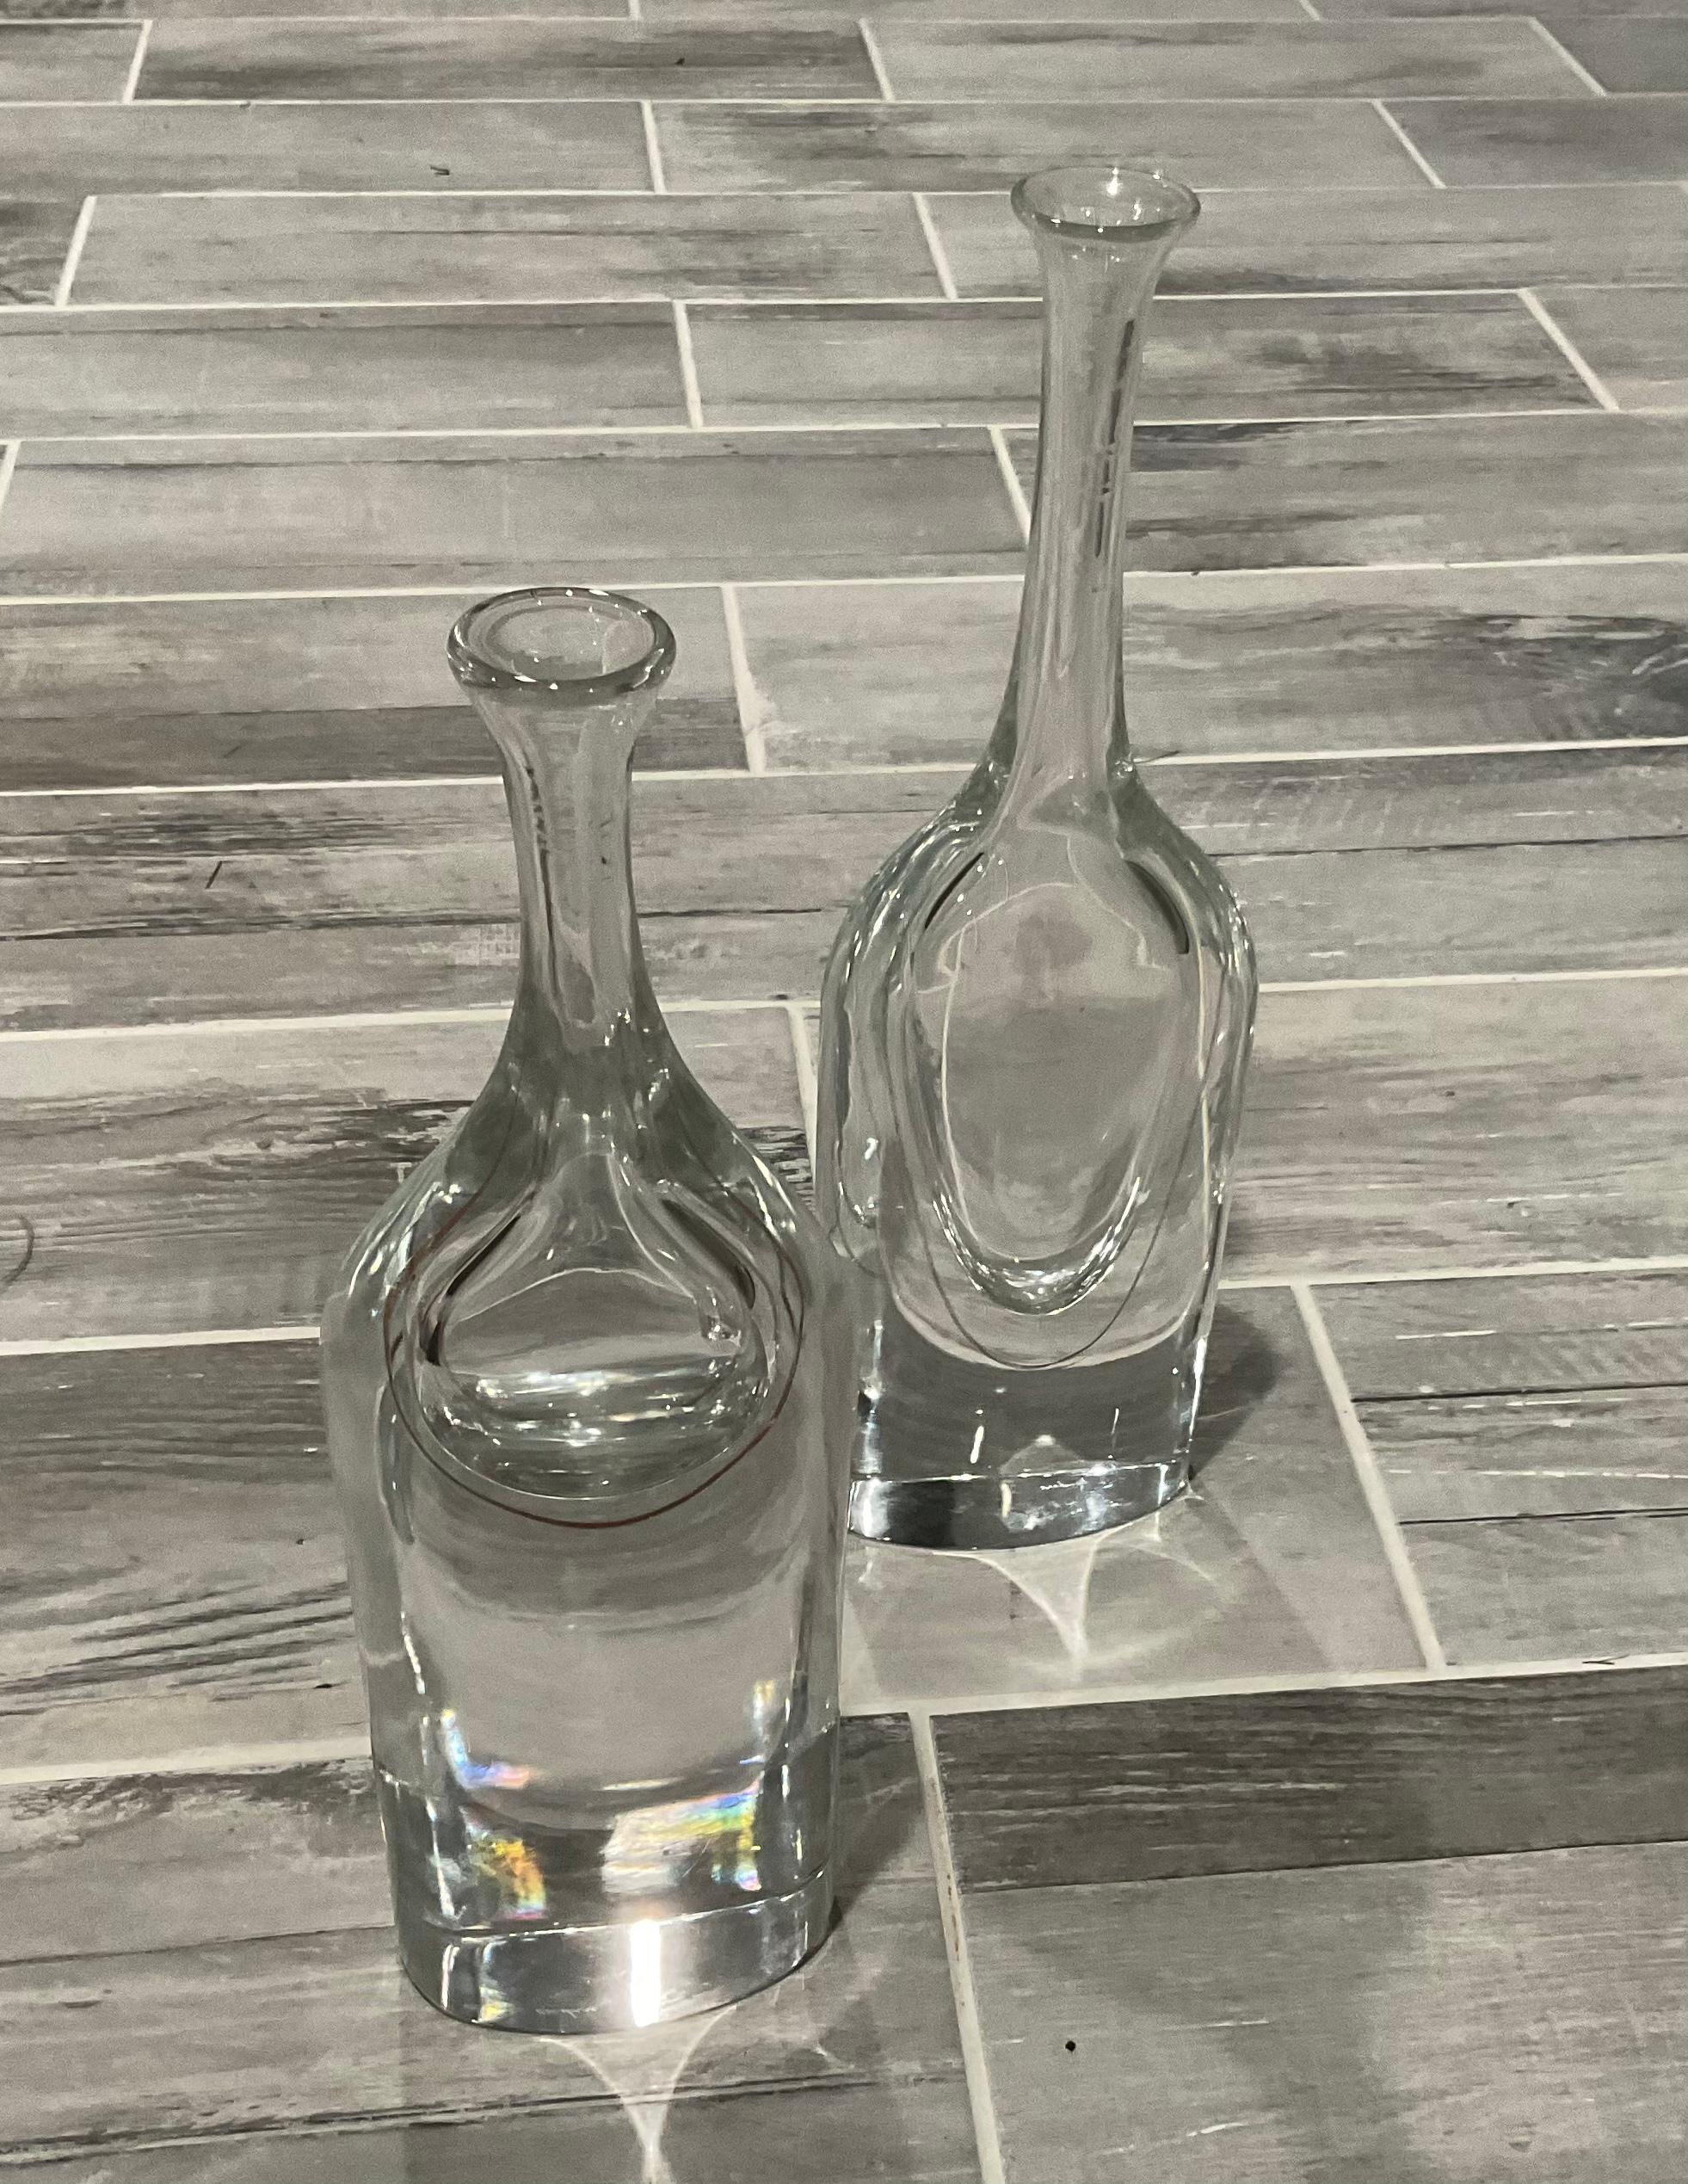 Rare PAIR Murano Sommerso glass vase Bottiglia Sasso Con Collo Corto Vase designed by Antonio Da Ros for Cenedese circa 1965. Shorter vase is 15 inches tall, by 4.5 inches wide by 2 inches depth. These vases look AMAZING together. Can be purchased